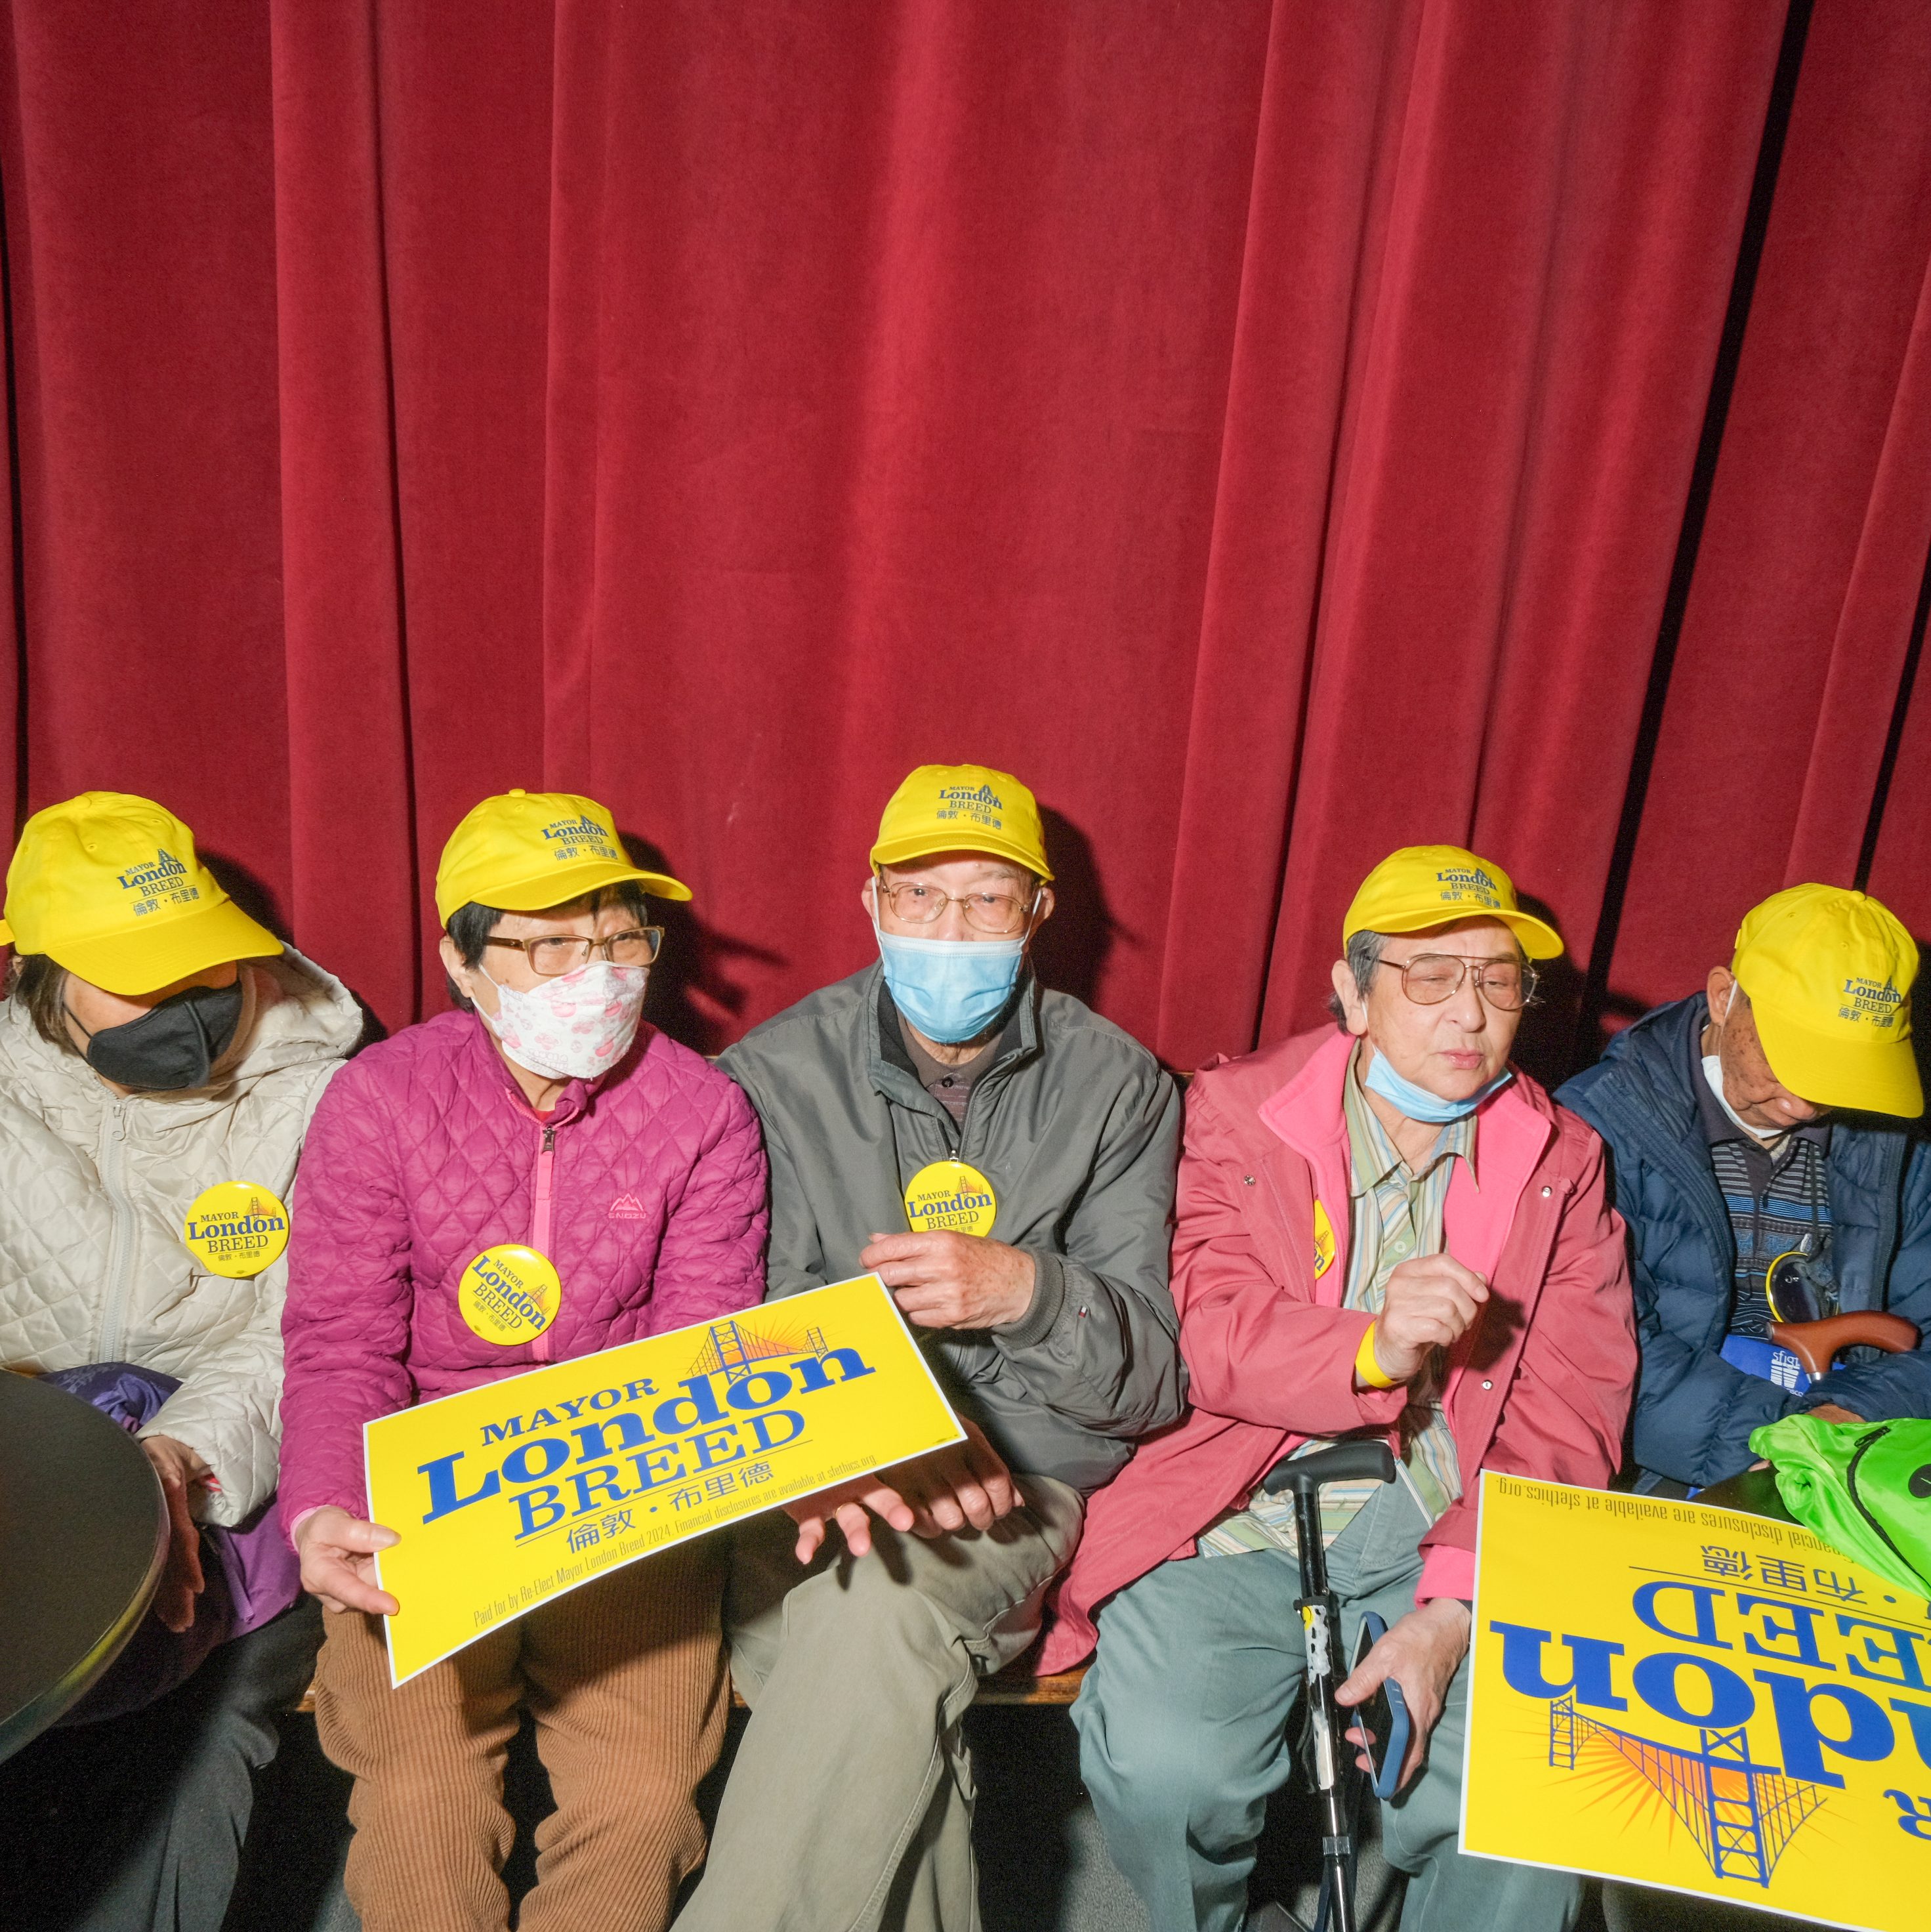 A group of elderly people, wearing yellow caps and jackets, sit holding &quot;Mayor London Breed&quot; campaign signs by a red curtain. Some wear masks.